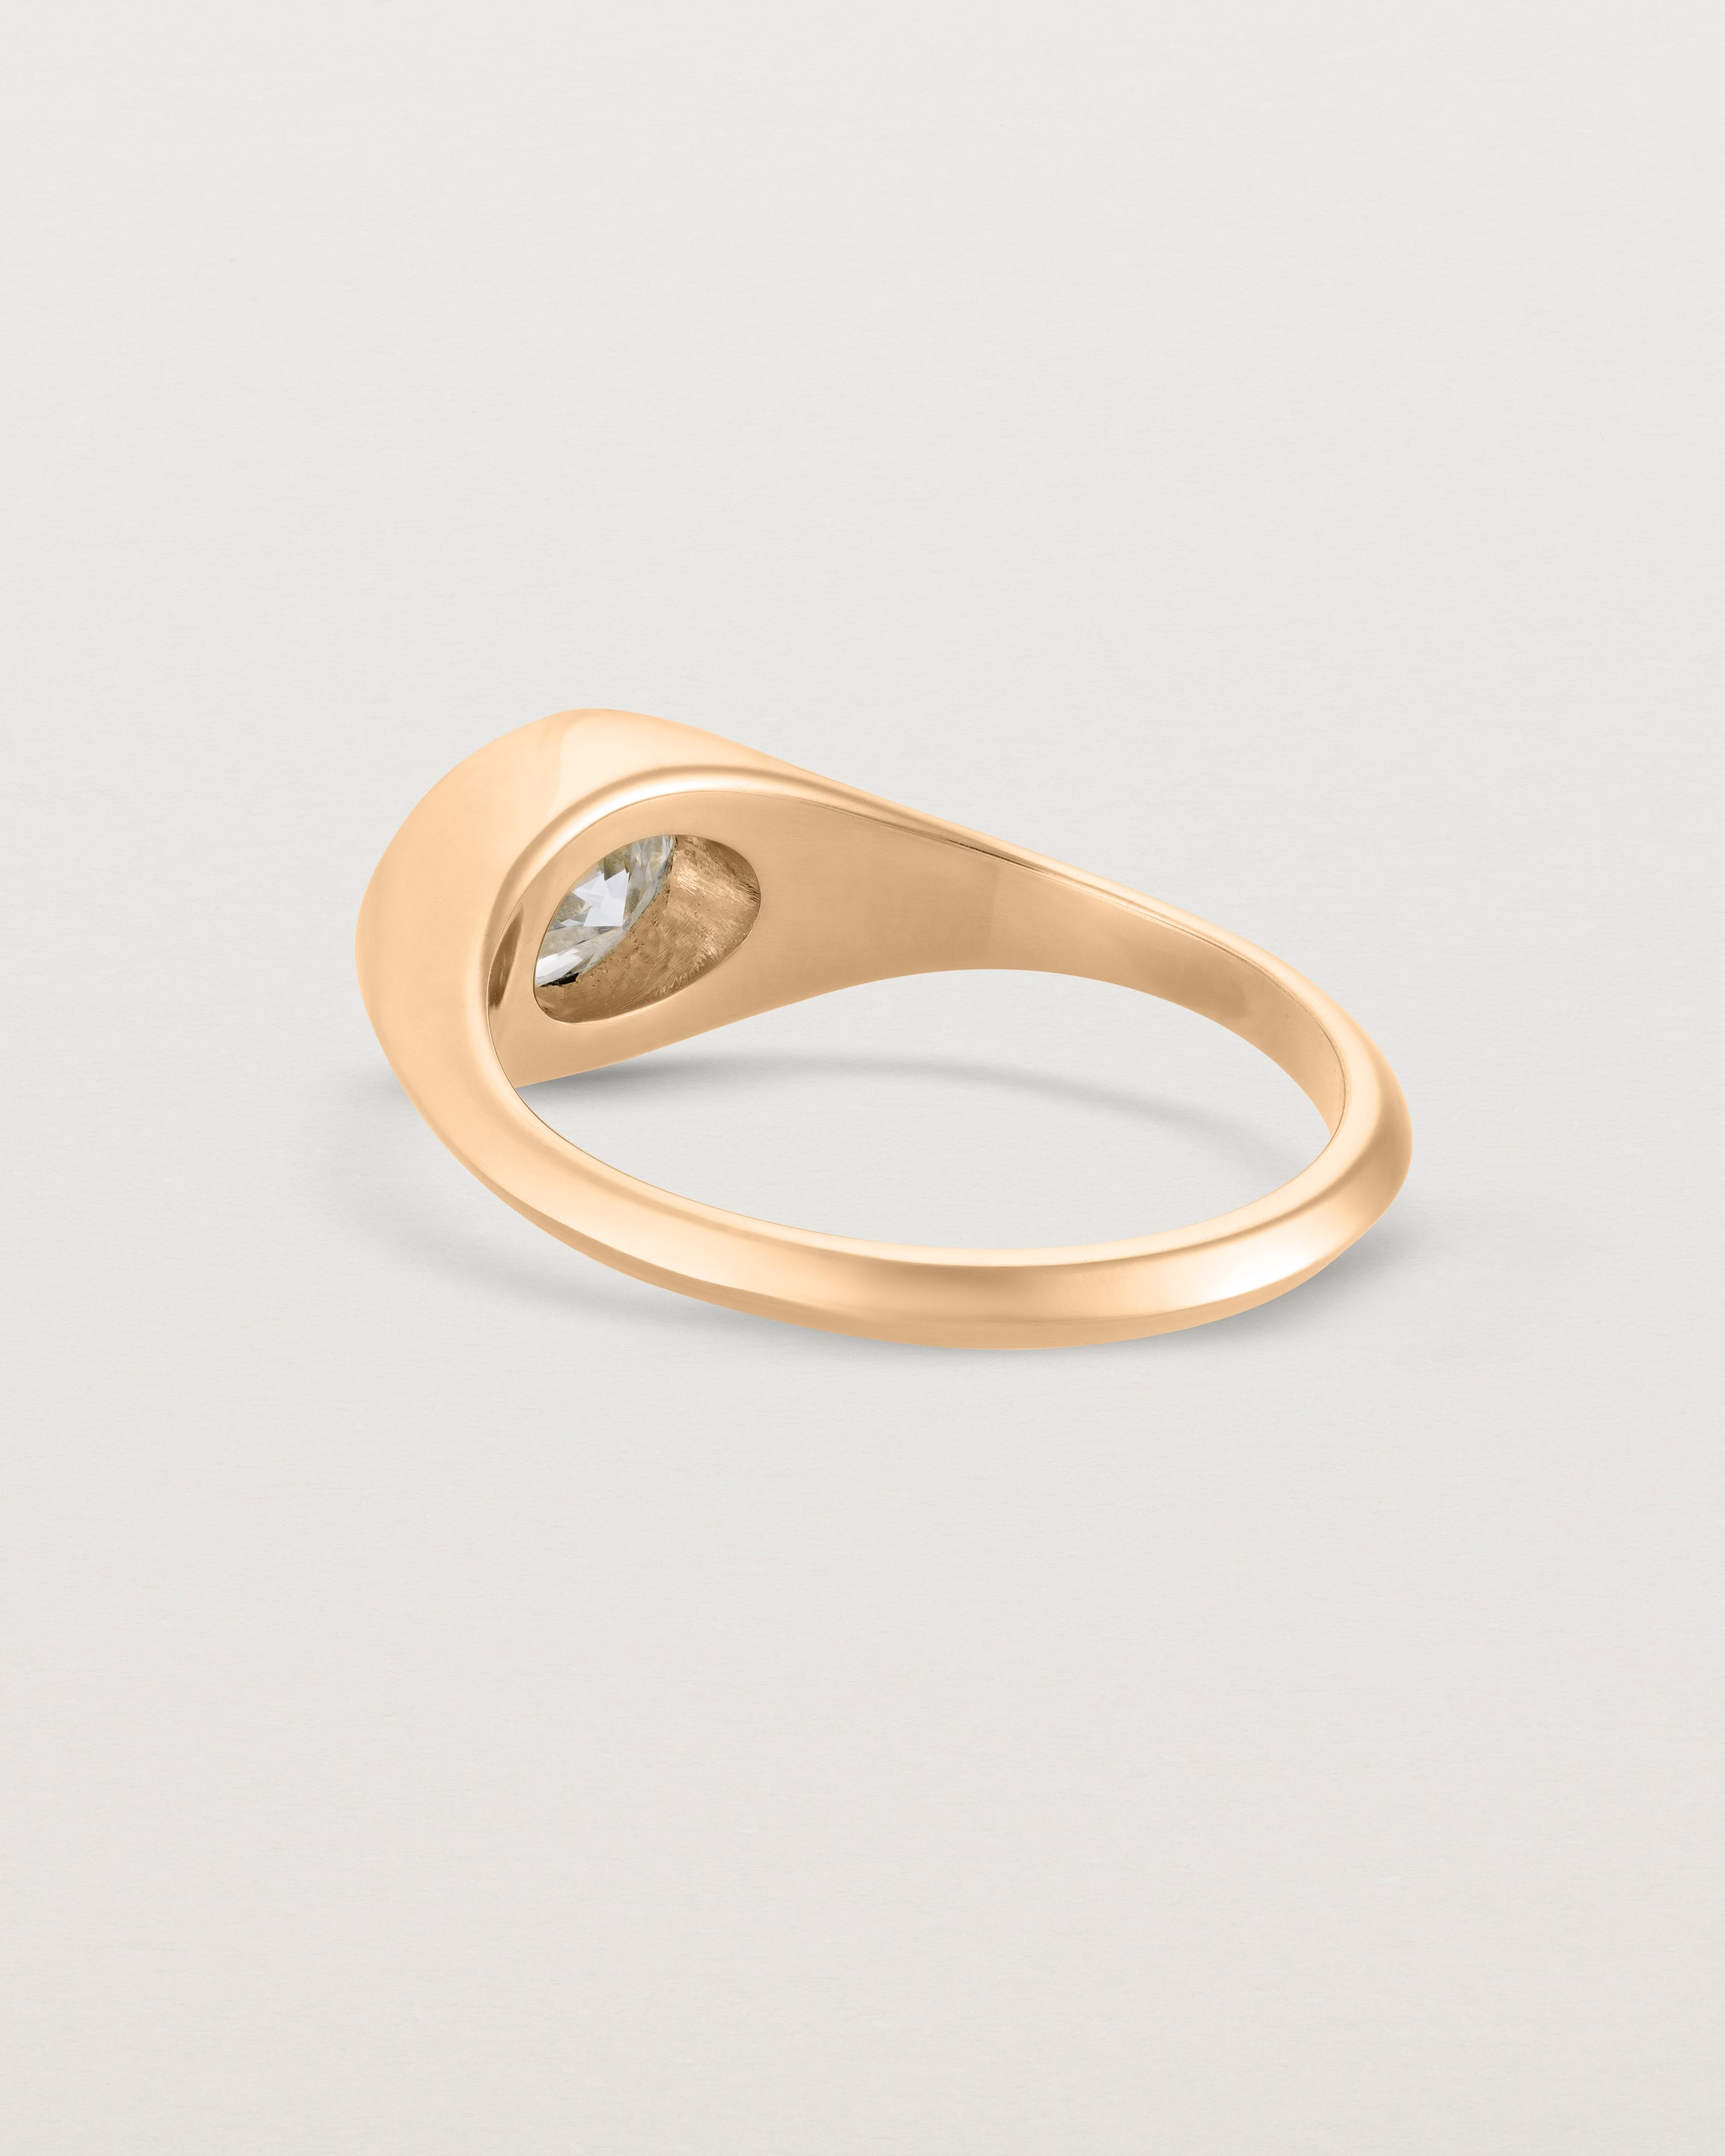 Back view of the Átlas Oval Signet | Laboratory Grown Diamond in rose gold, with a polished finish.